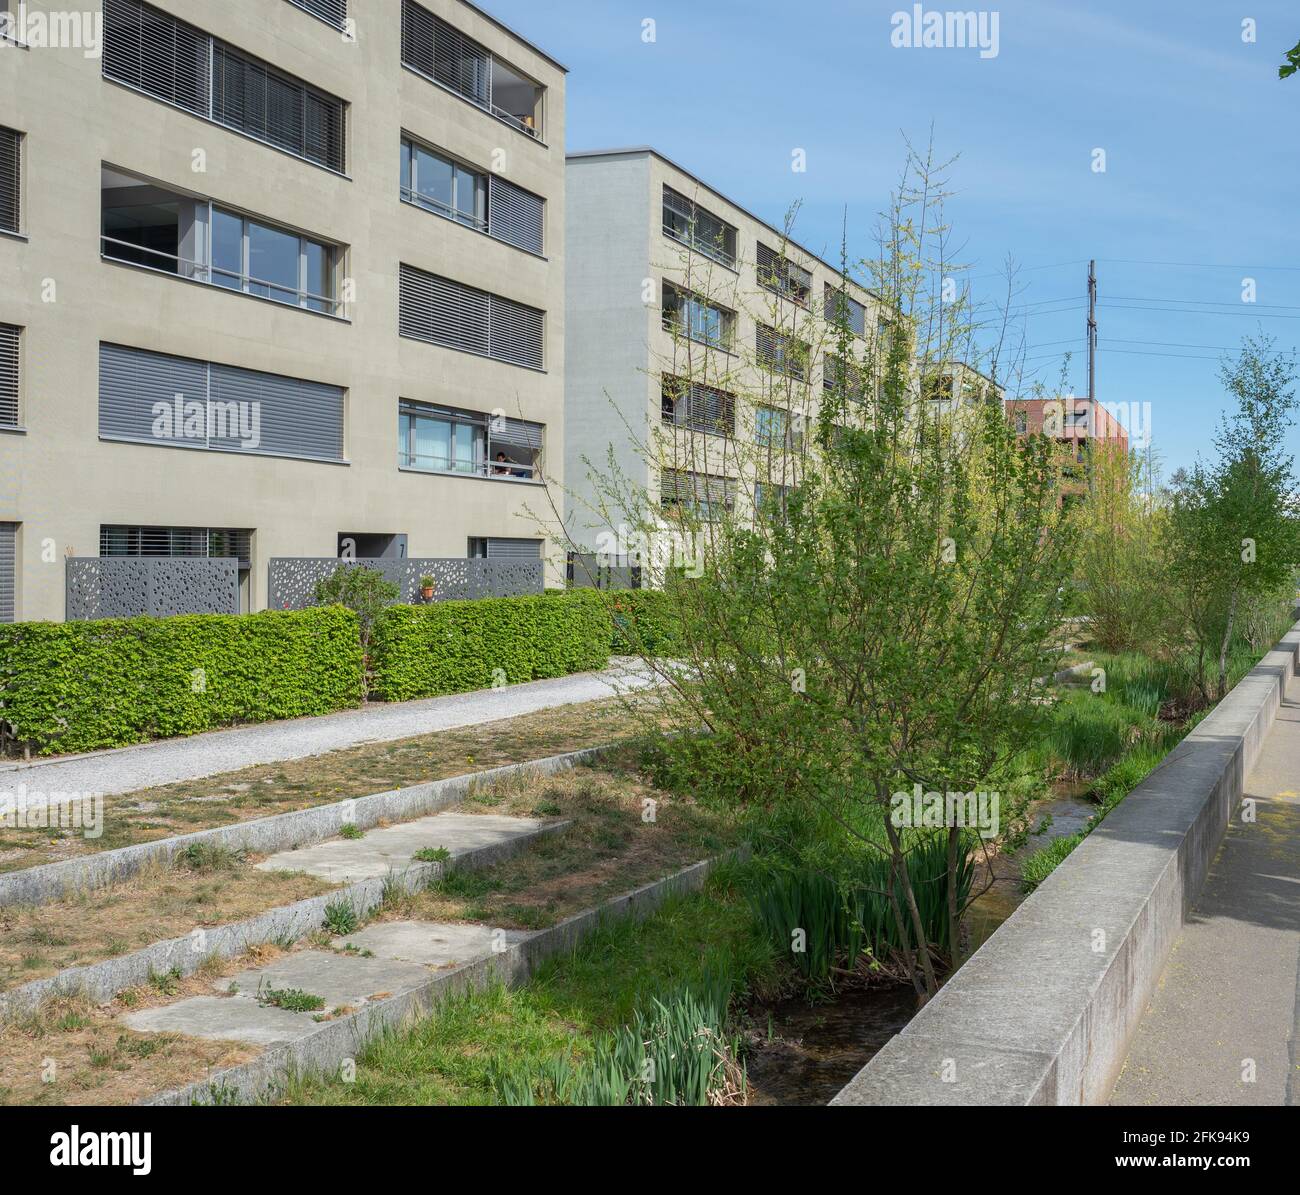 Zurich, Switzerland - April 19th 2020: A small stream being restored in the course of a housing project Stock Photo